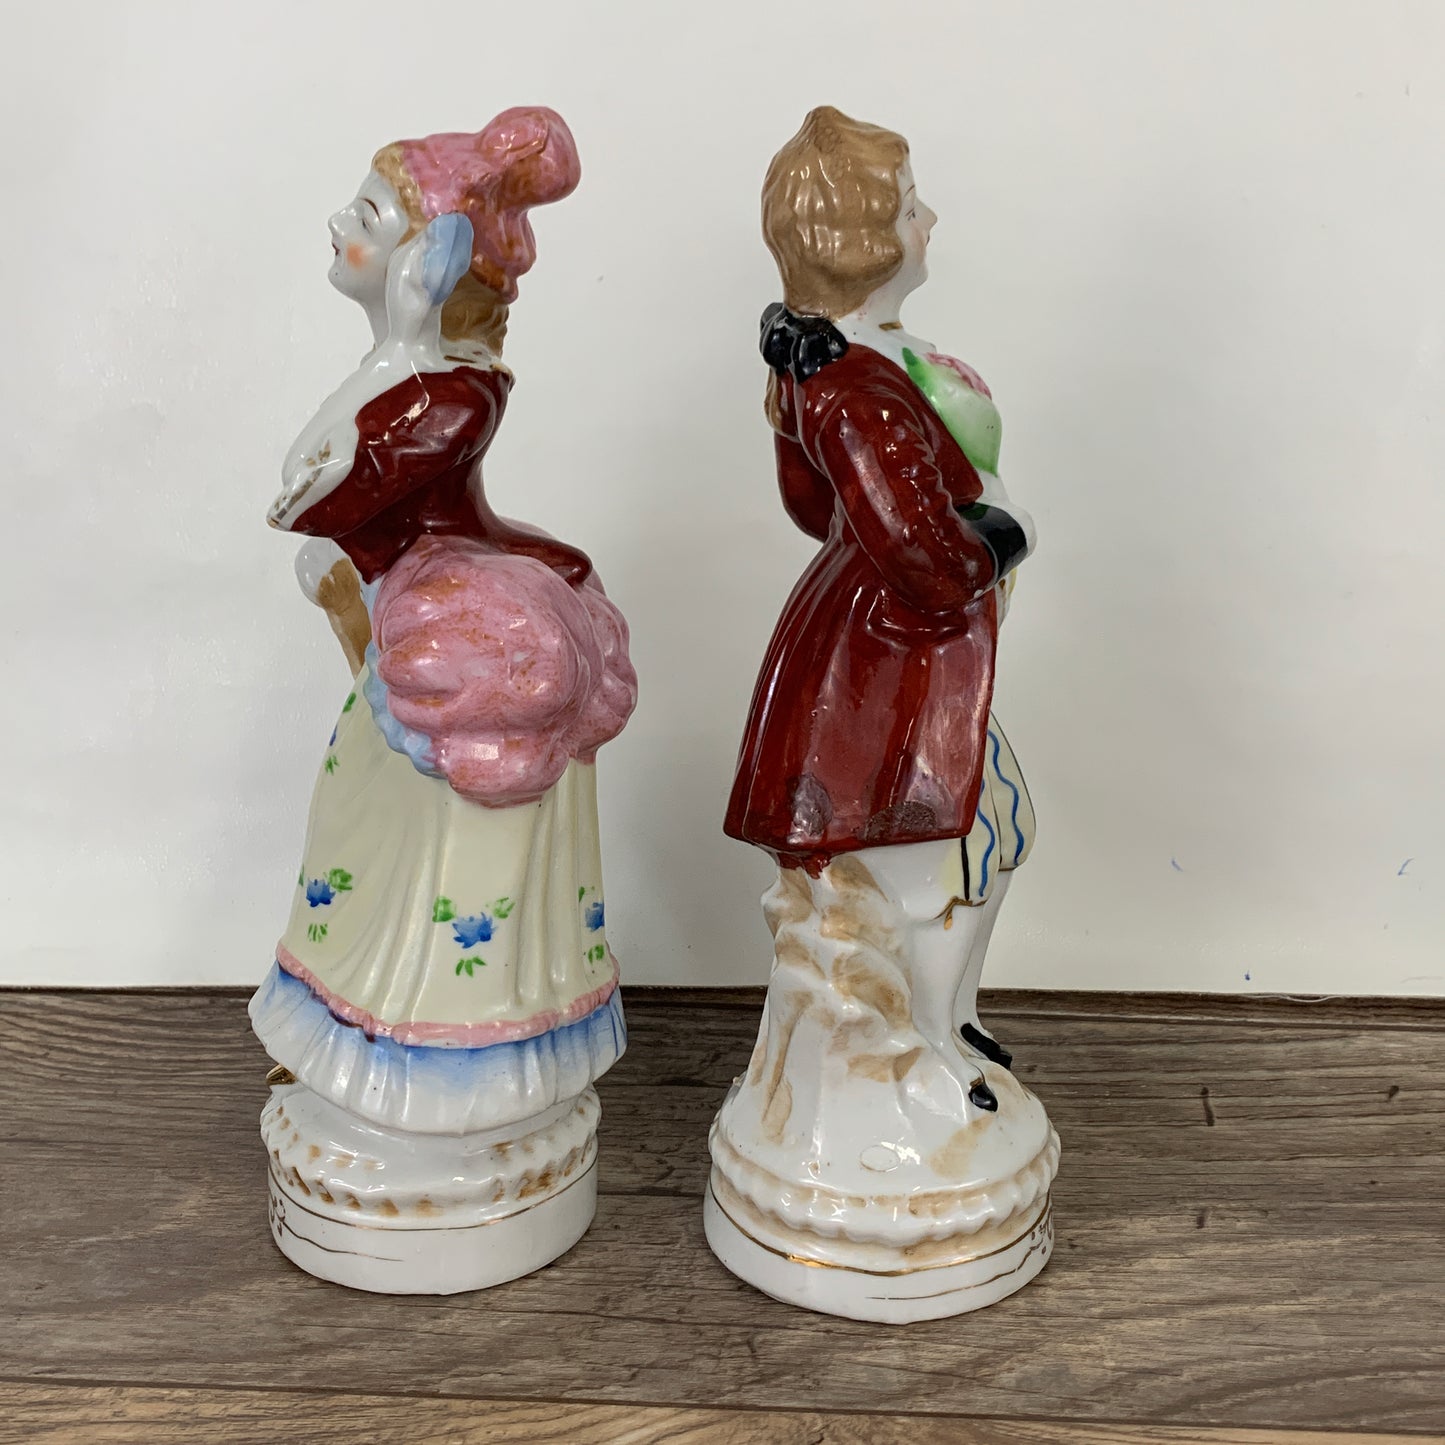 Made in Japan Figurines-Victorian Lady Figurine-Victorian Man Figurine-Japan Figurine-Vintage Home Decor-Vintage Figurines-Shabby Chic Decor